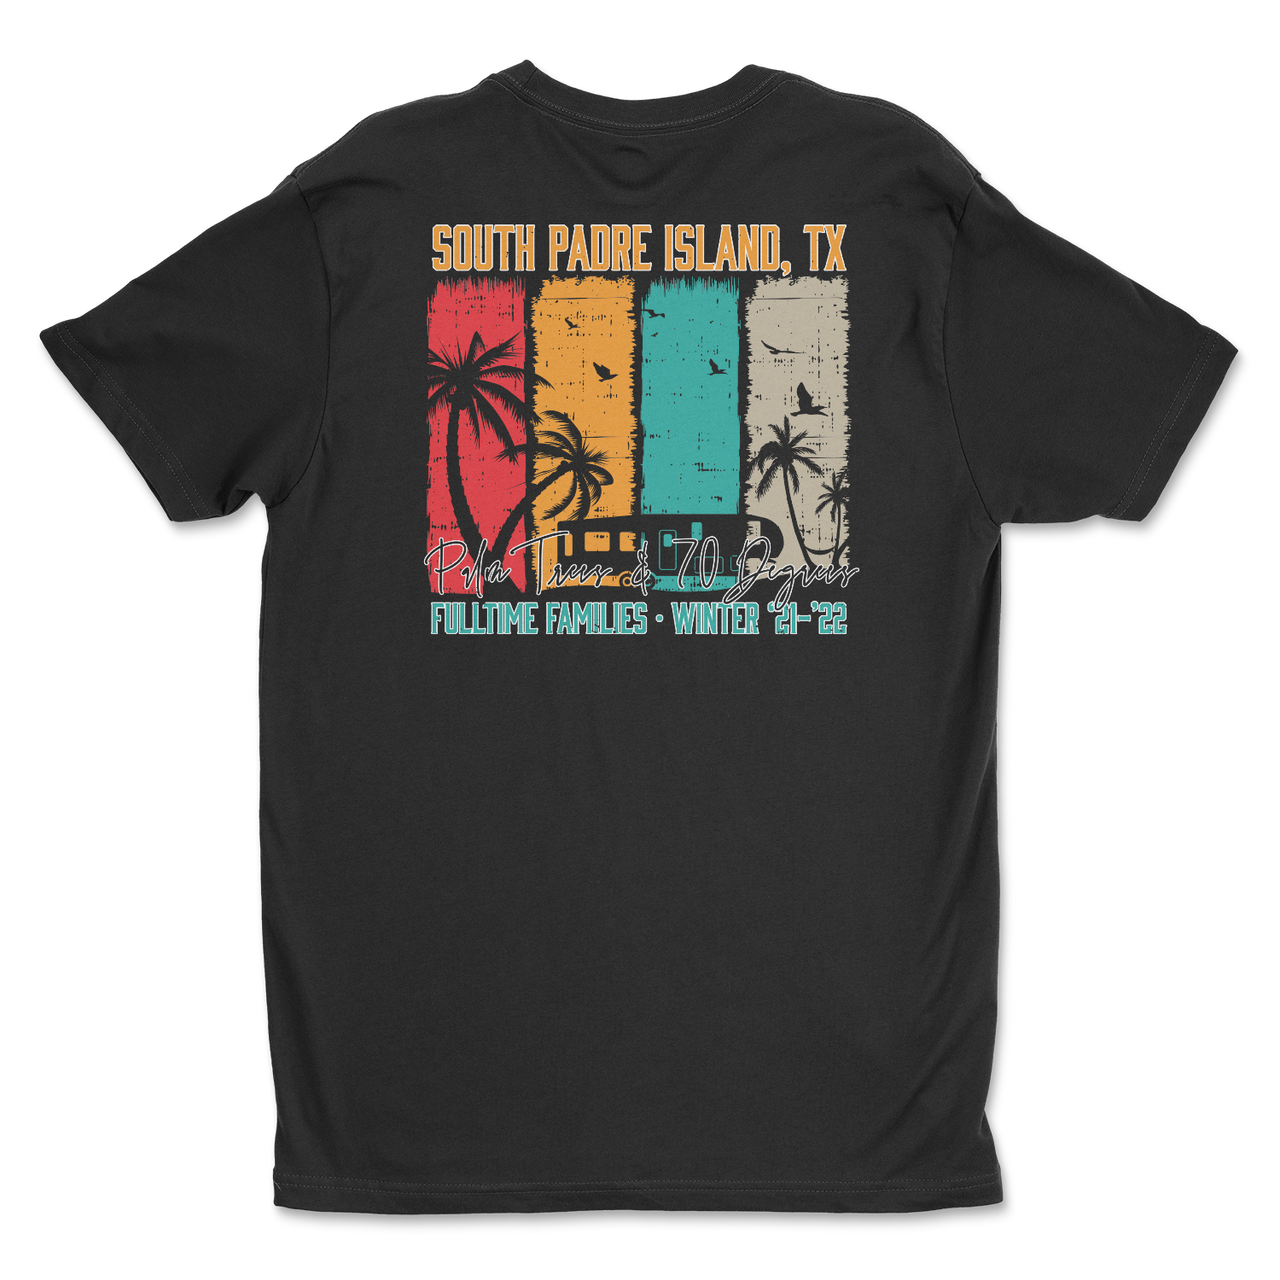 Fulltime Families South Padre Island Winter '21-'22 Limited Edition Kids Shirt